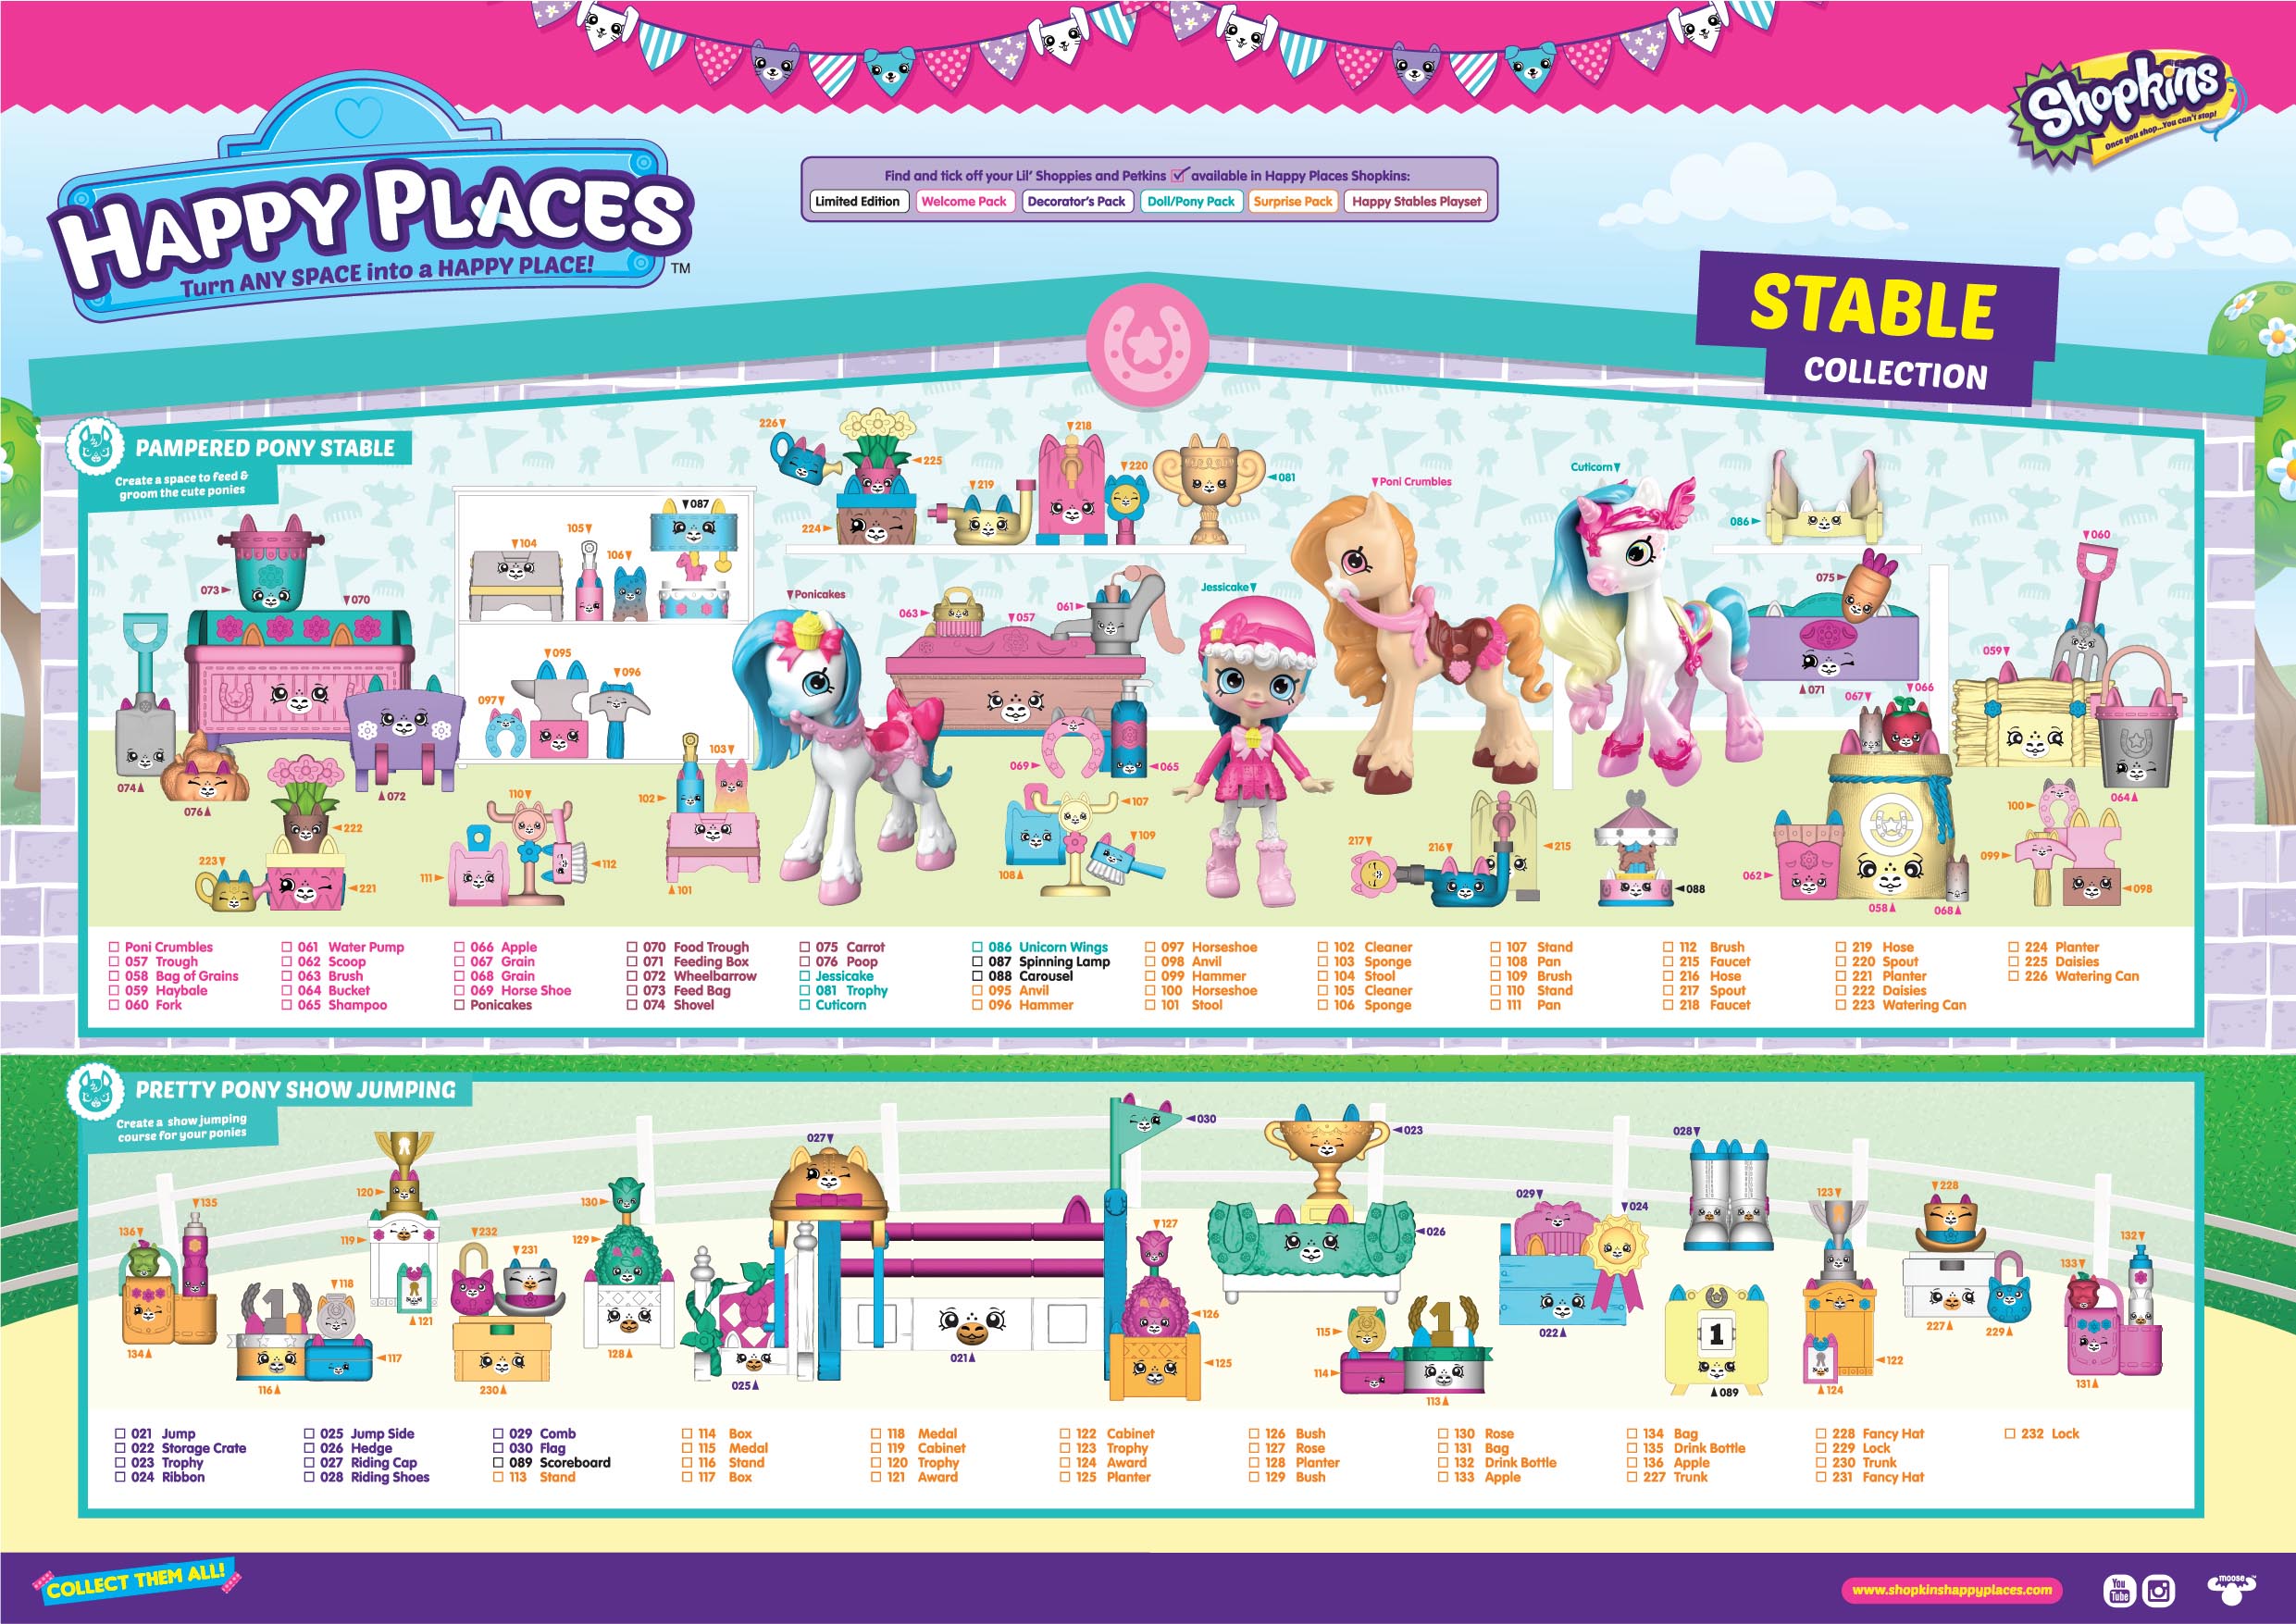 shopkins-happy-places-season-4-stable-collection-checklist-kids-time